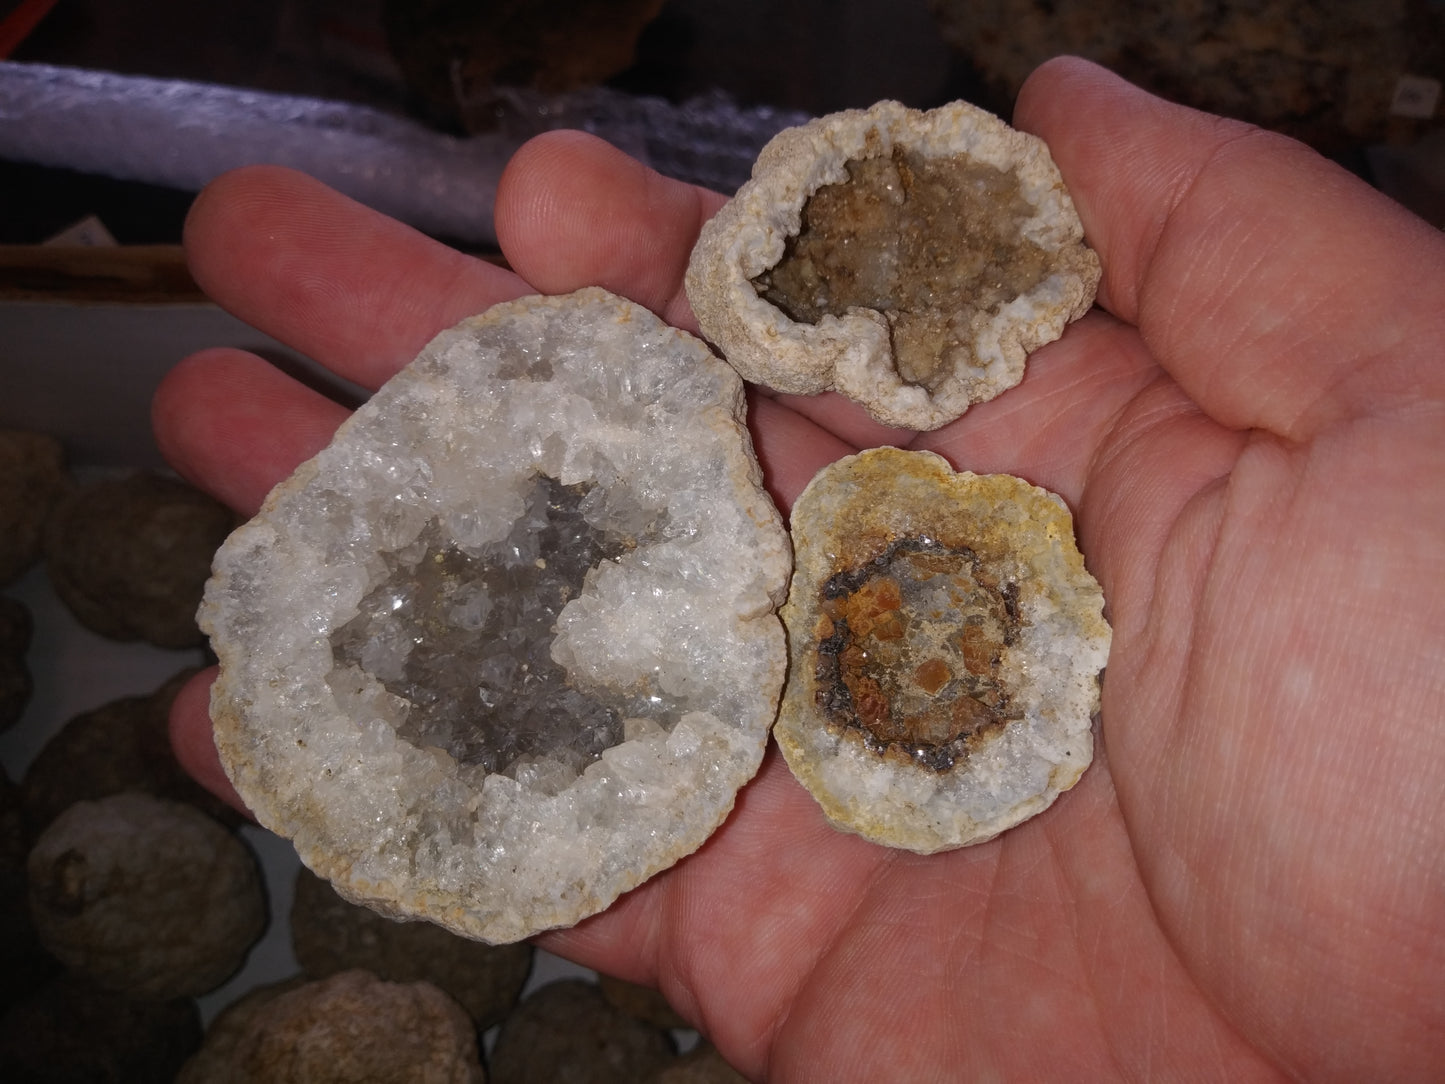 3 Uncracked Warsaw Formation Geodes (2-3 Inches)